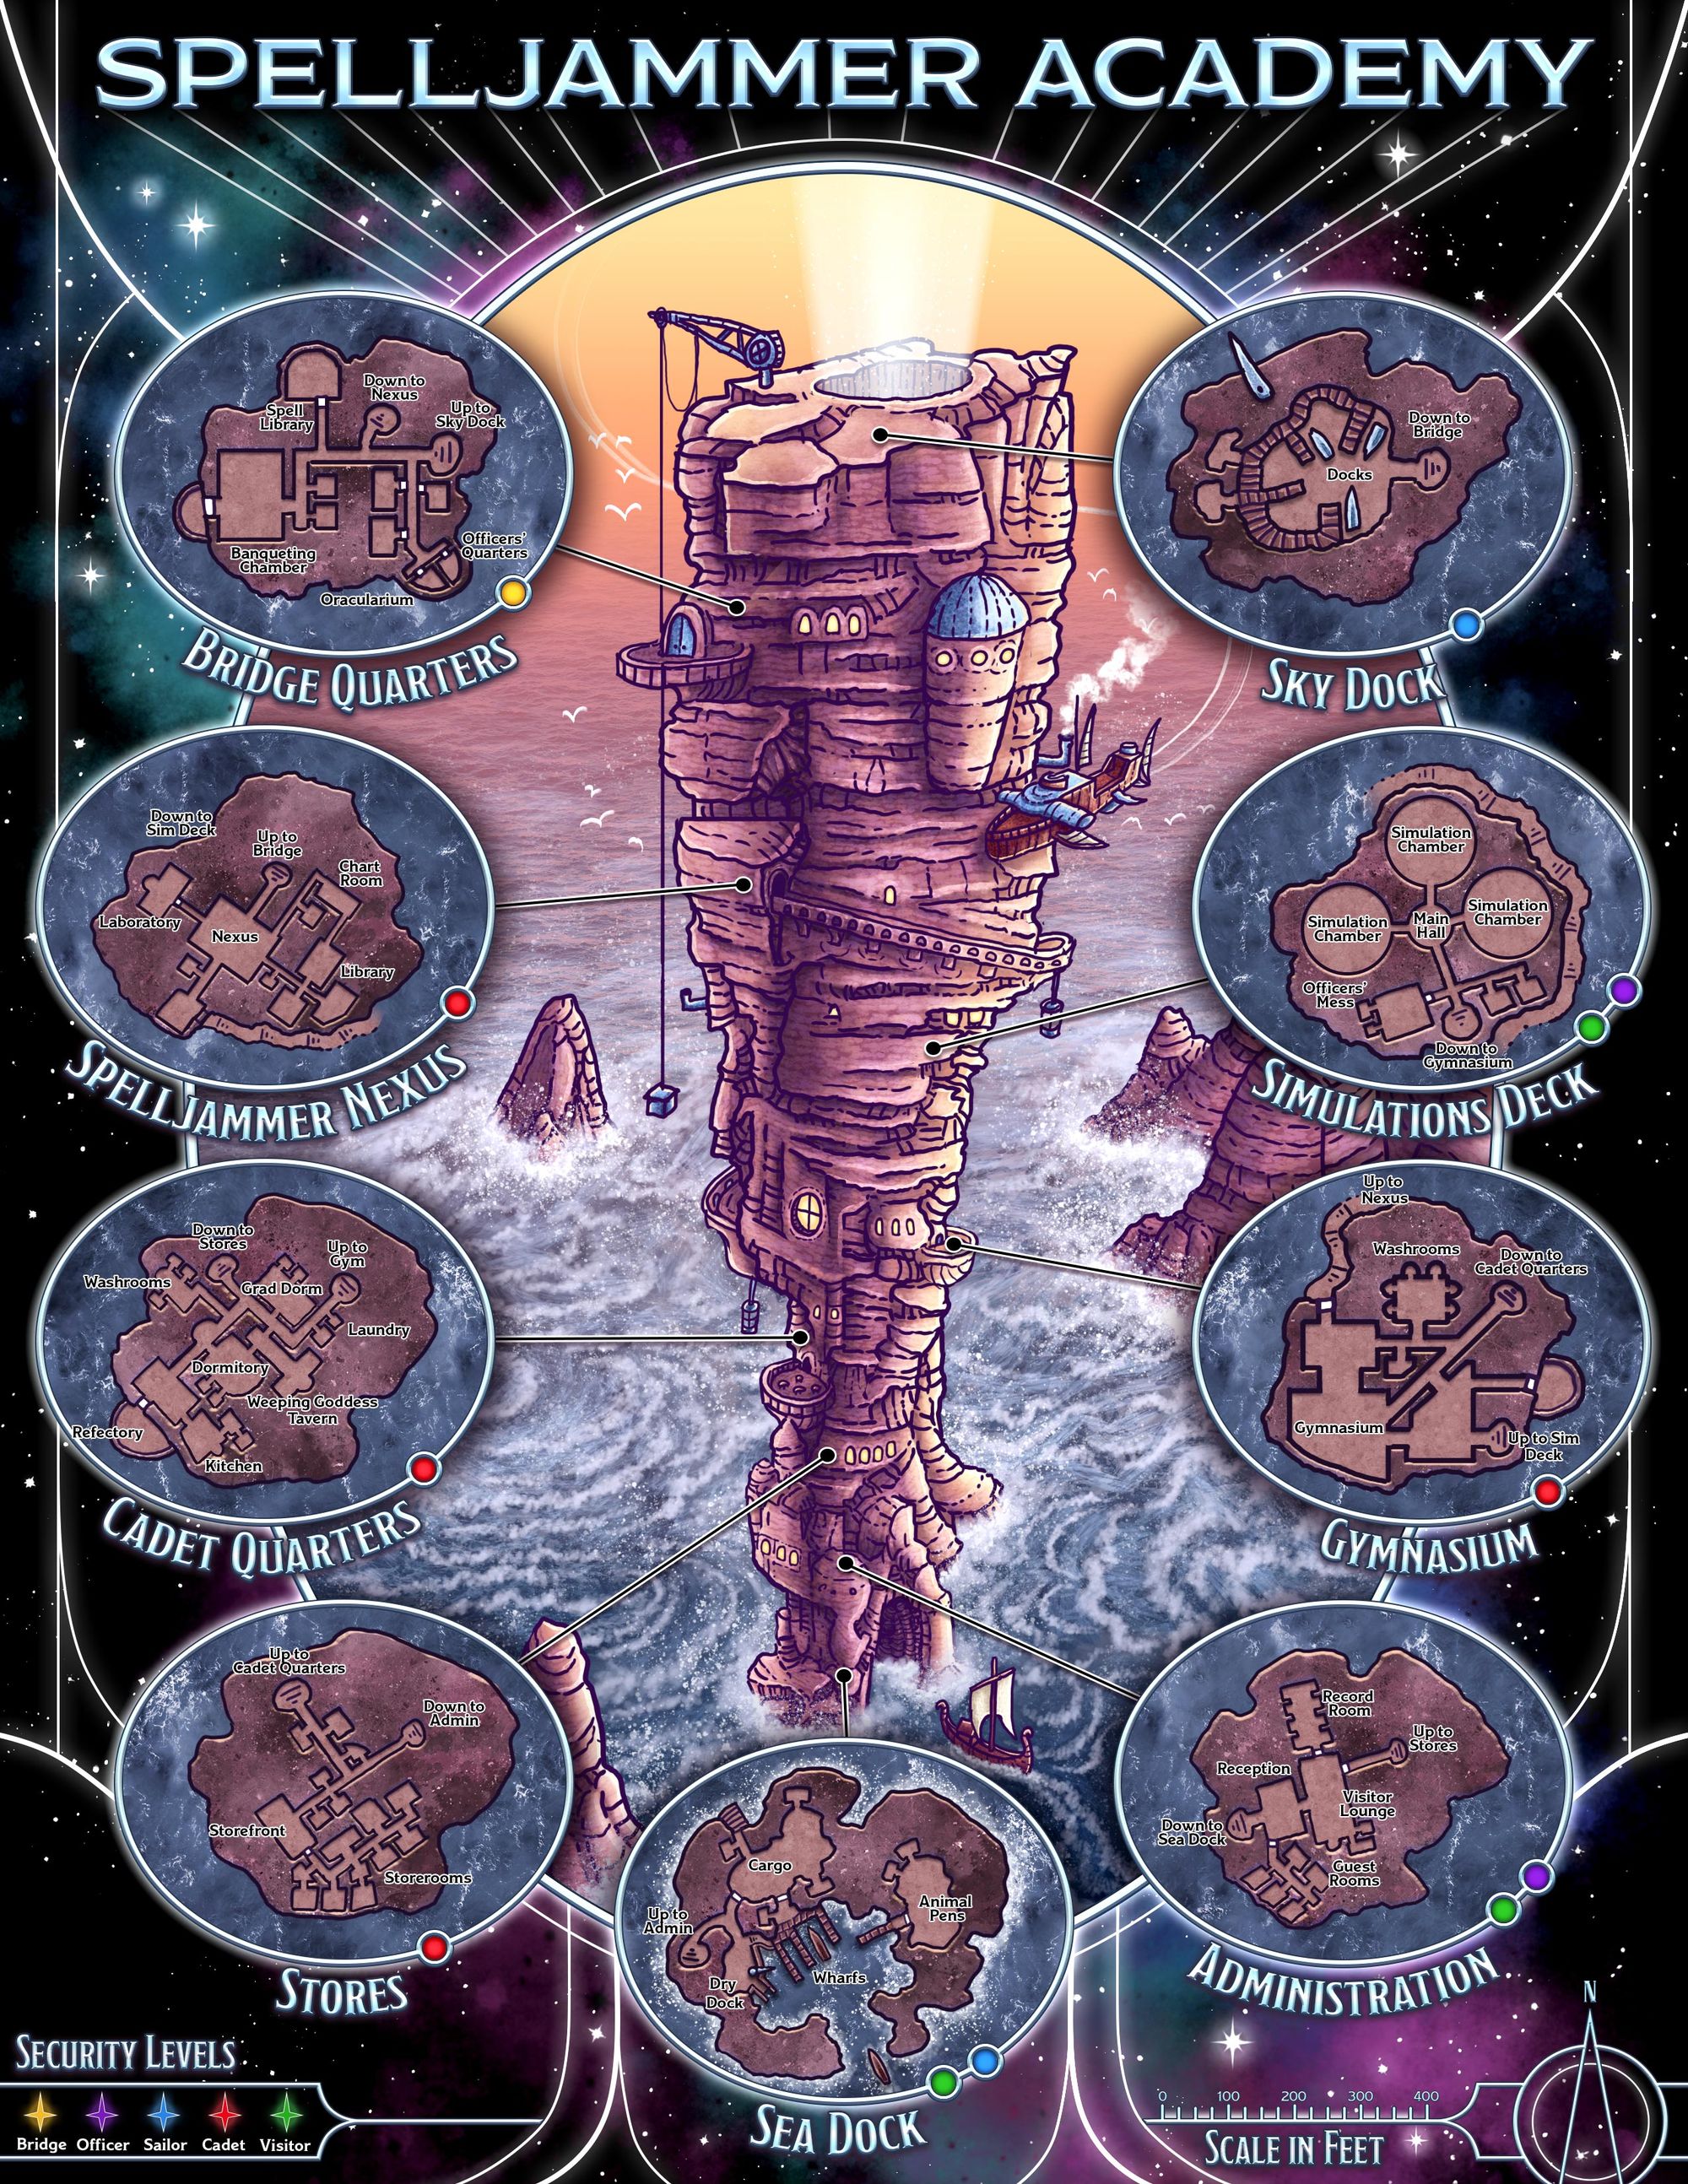 Diagram of Spelljammer academy showing the various areas to explore and their colour codes